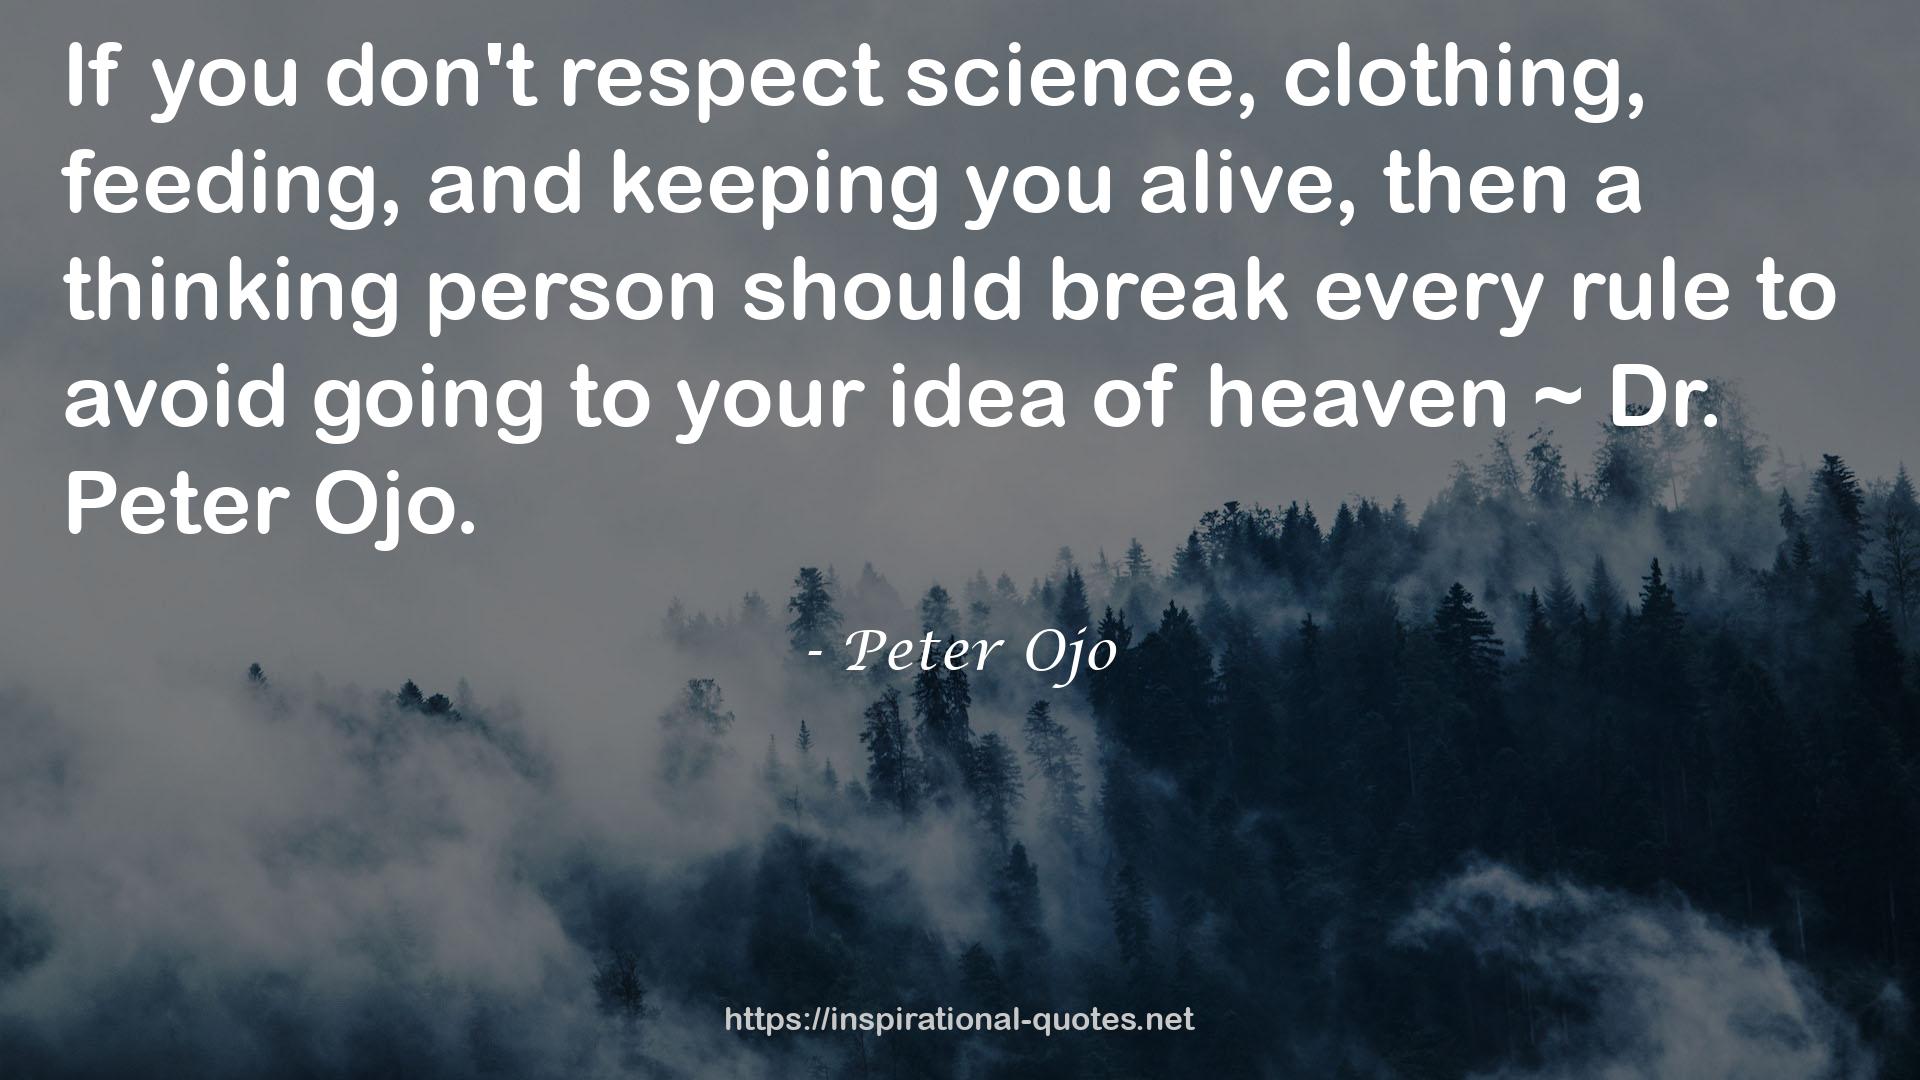 Peter Ojo QUOTES